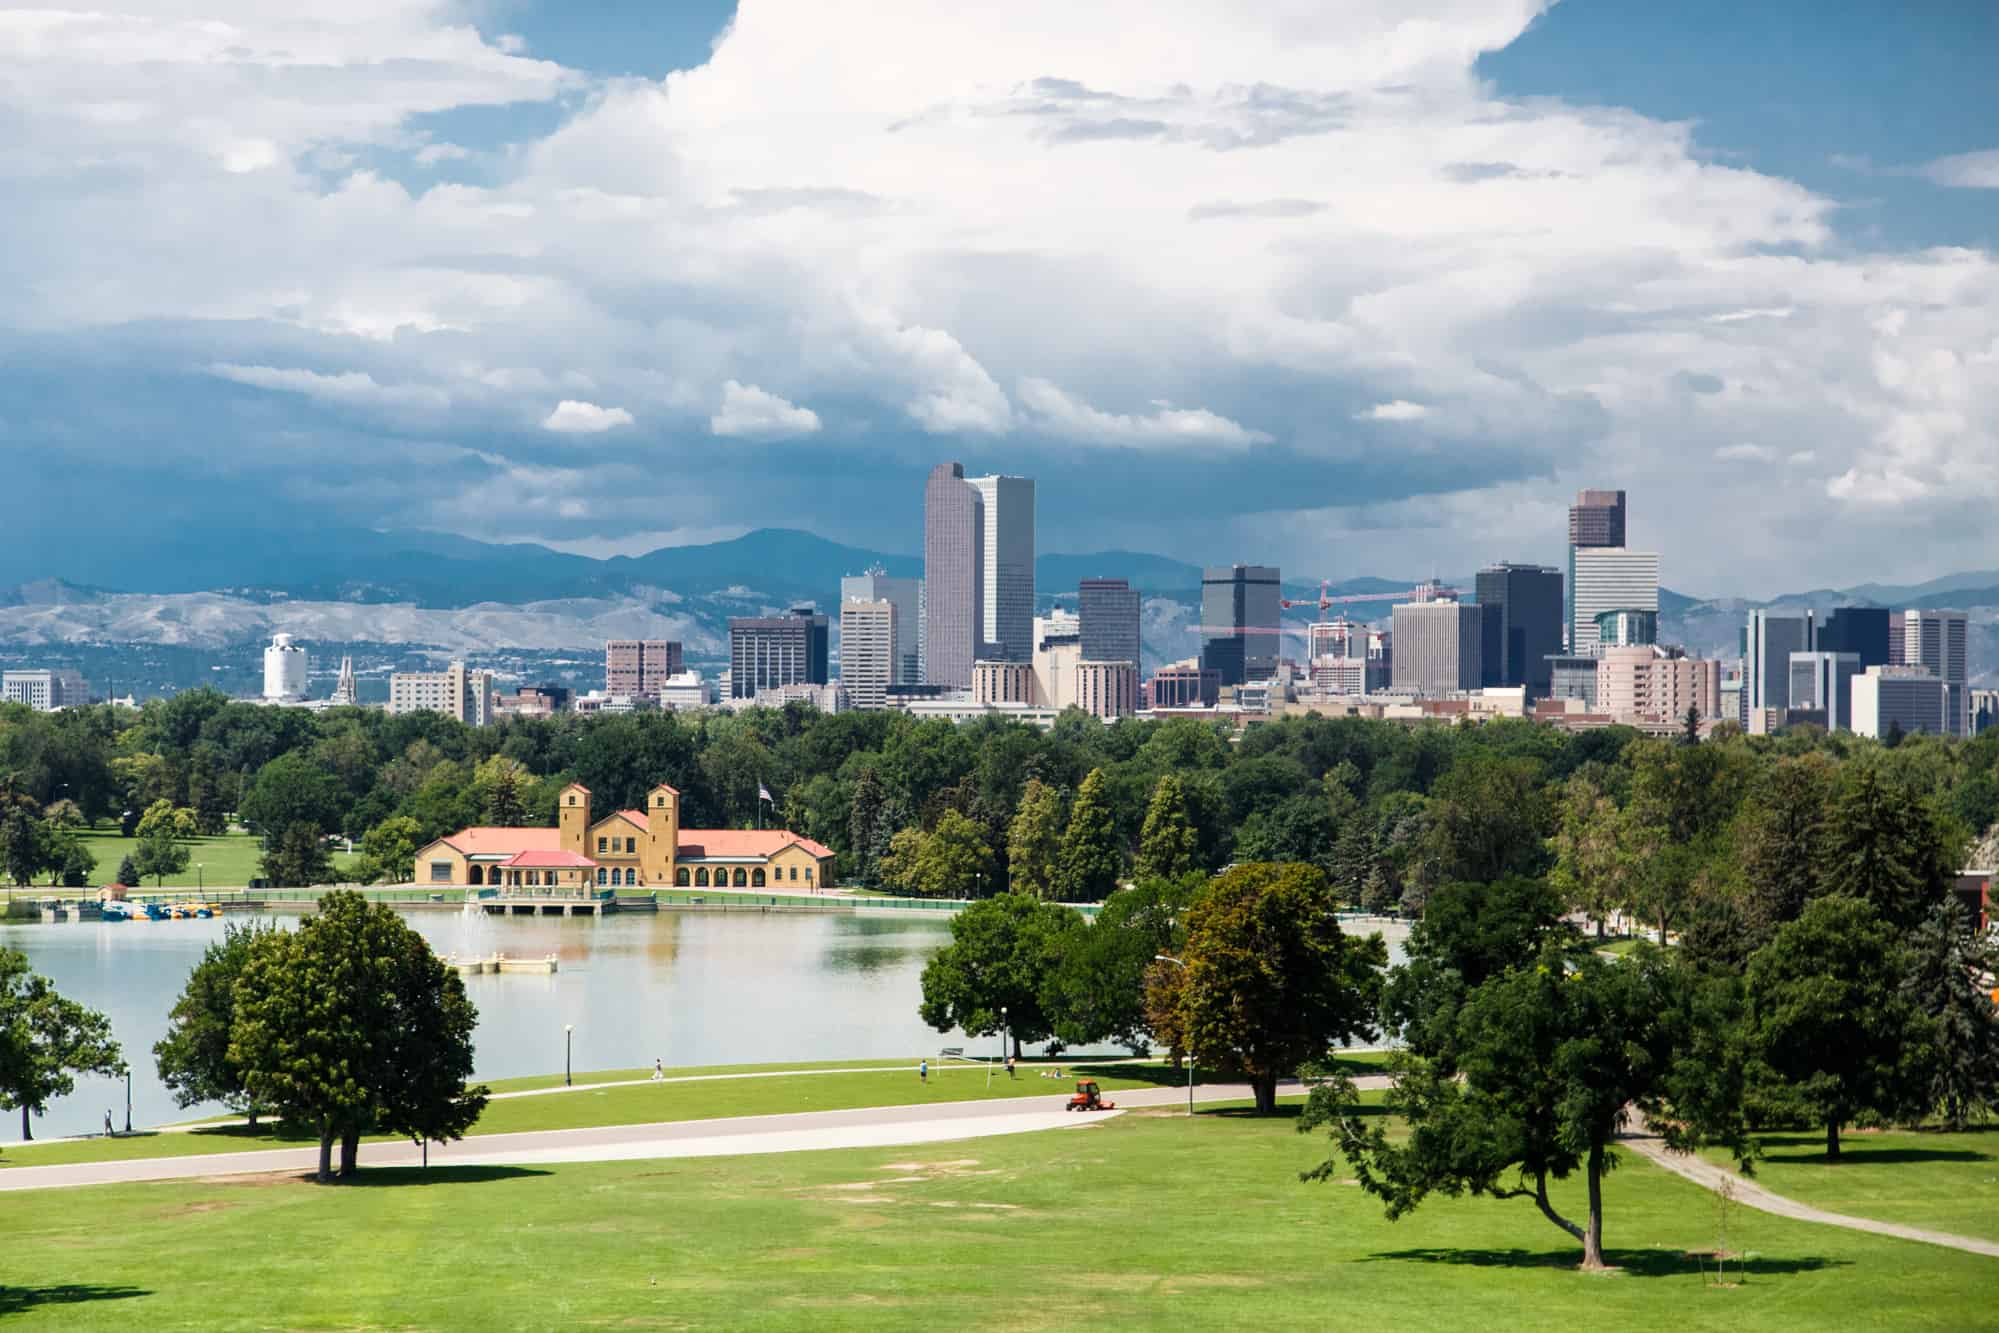 Buying A Franchise In Colorado - Denver Colorado Skyline and Park - Franchise Matchmakers